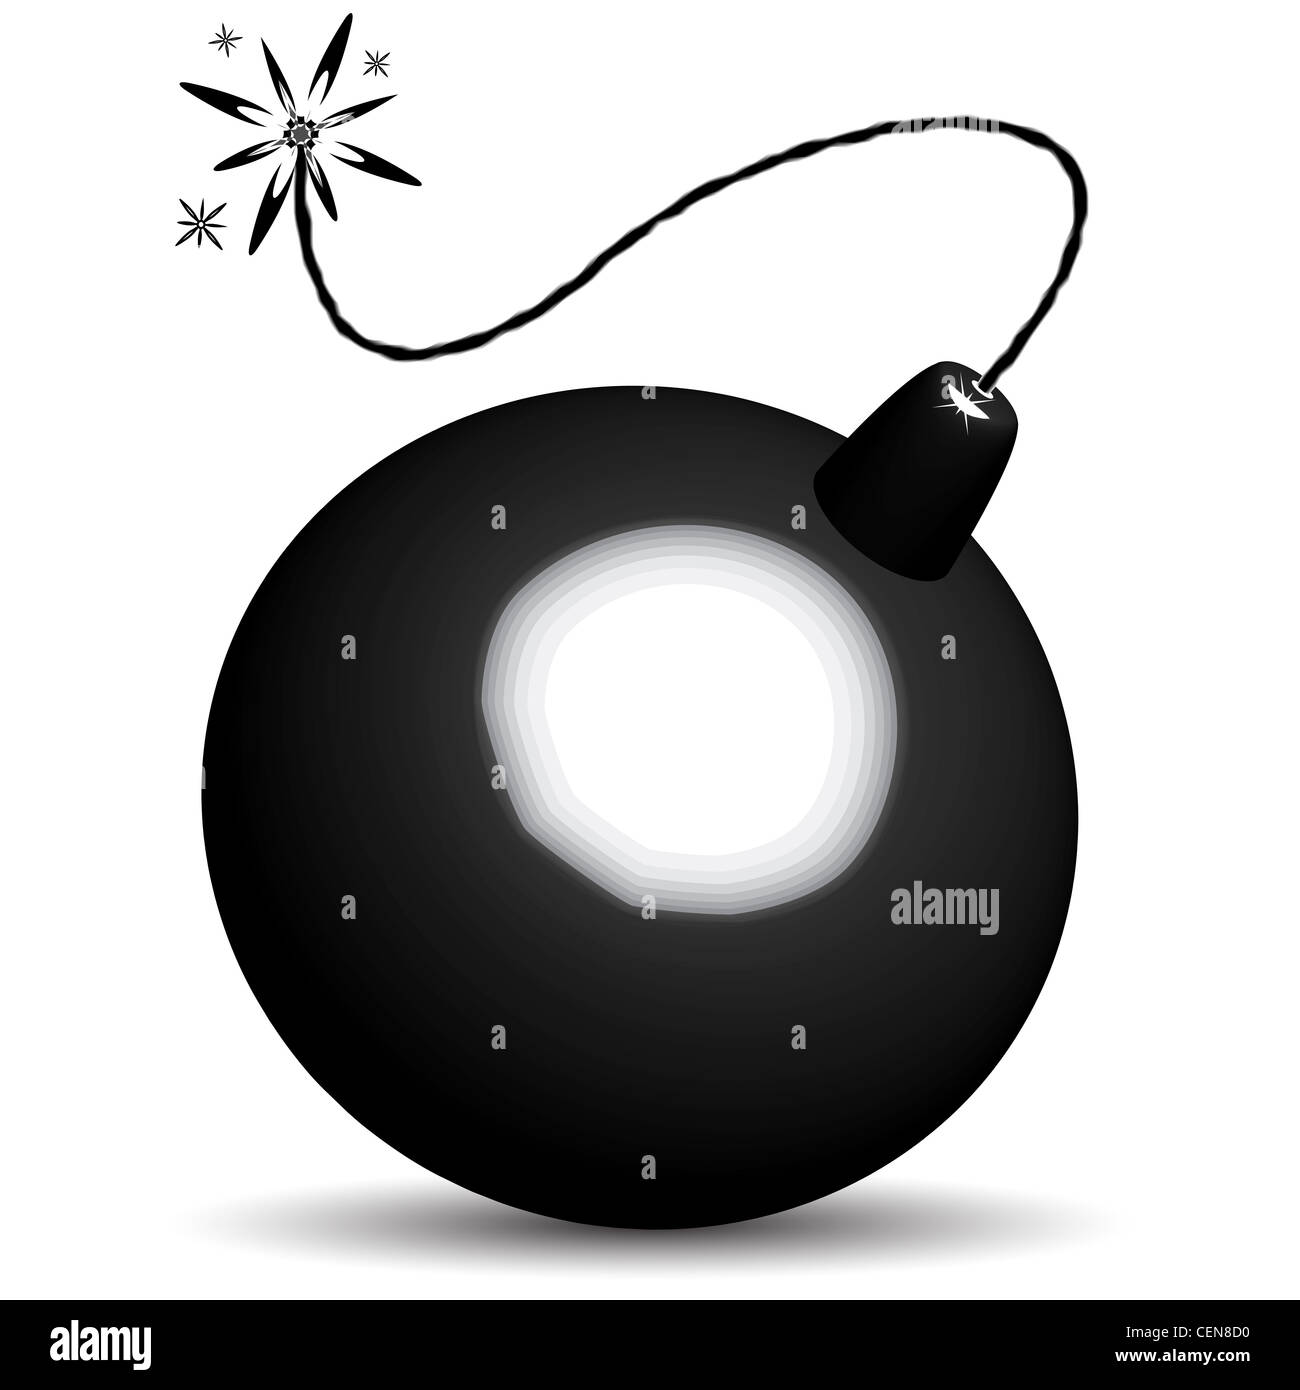 bomb icon against white background, abstract vector art illustration Stock Photo